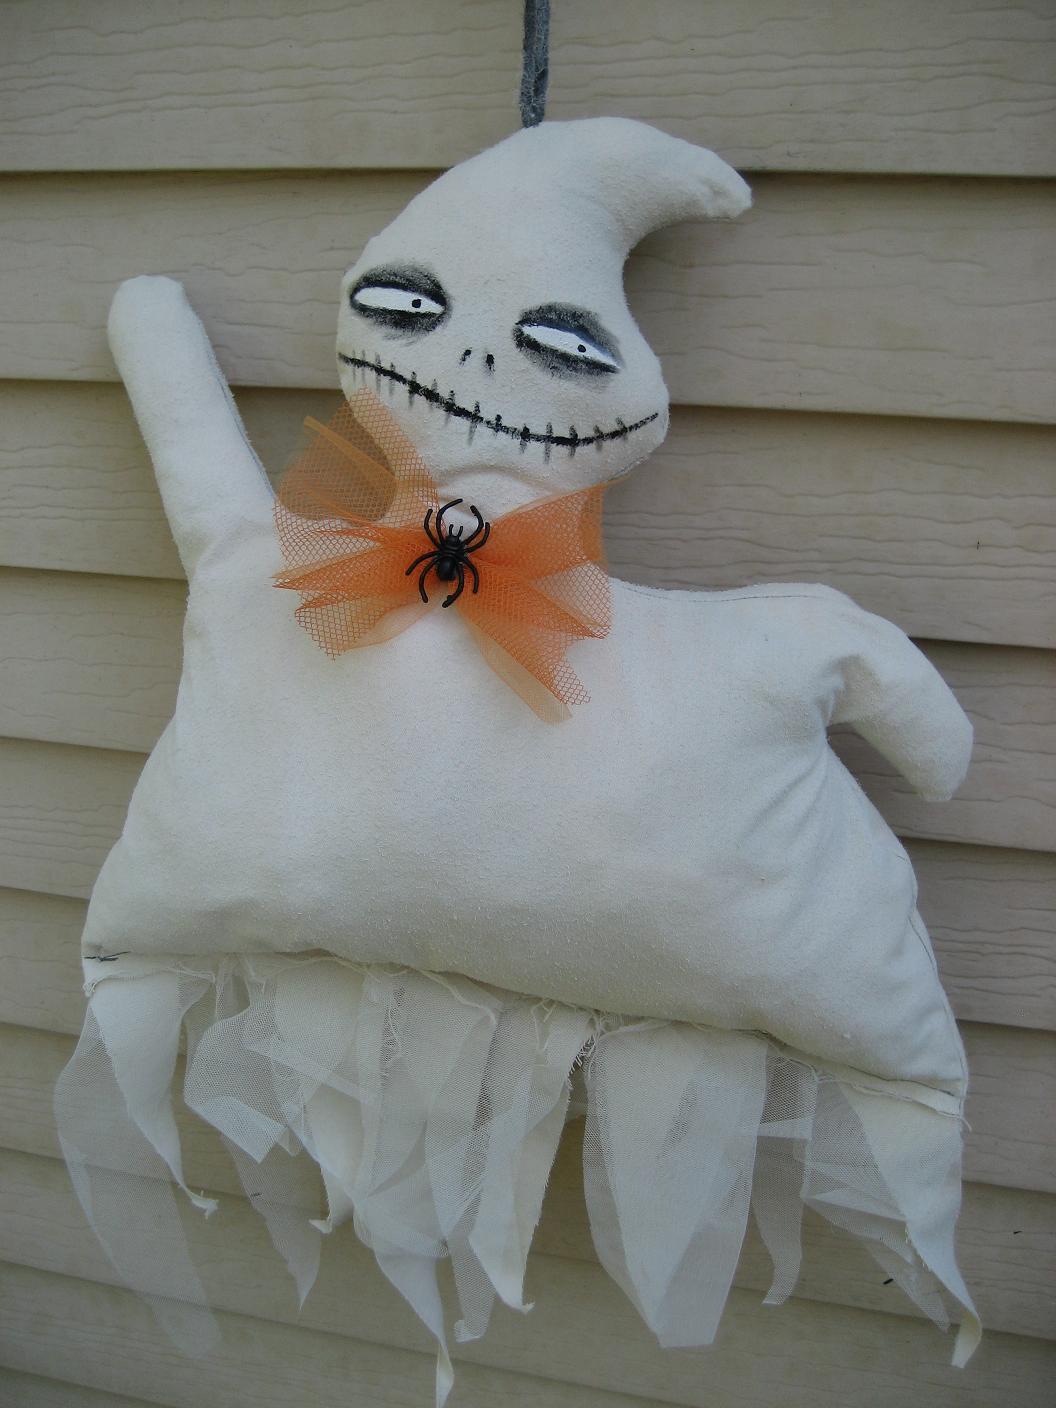 40 Best Pictures Ghost Decorations For Yard : DIY Floating Halloween Ghosts For Your Yard